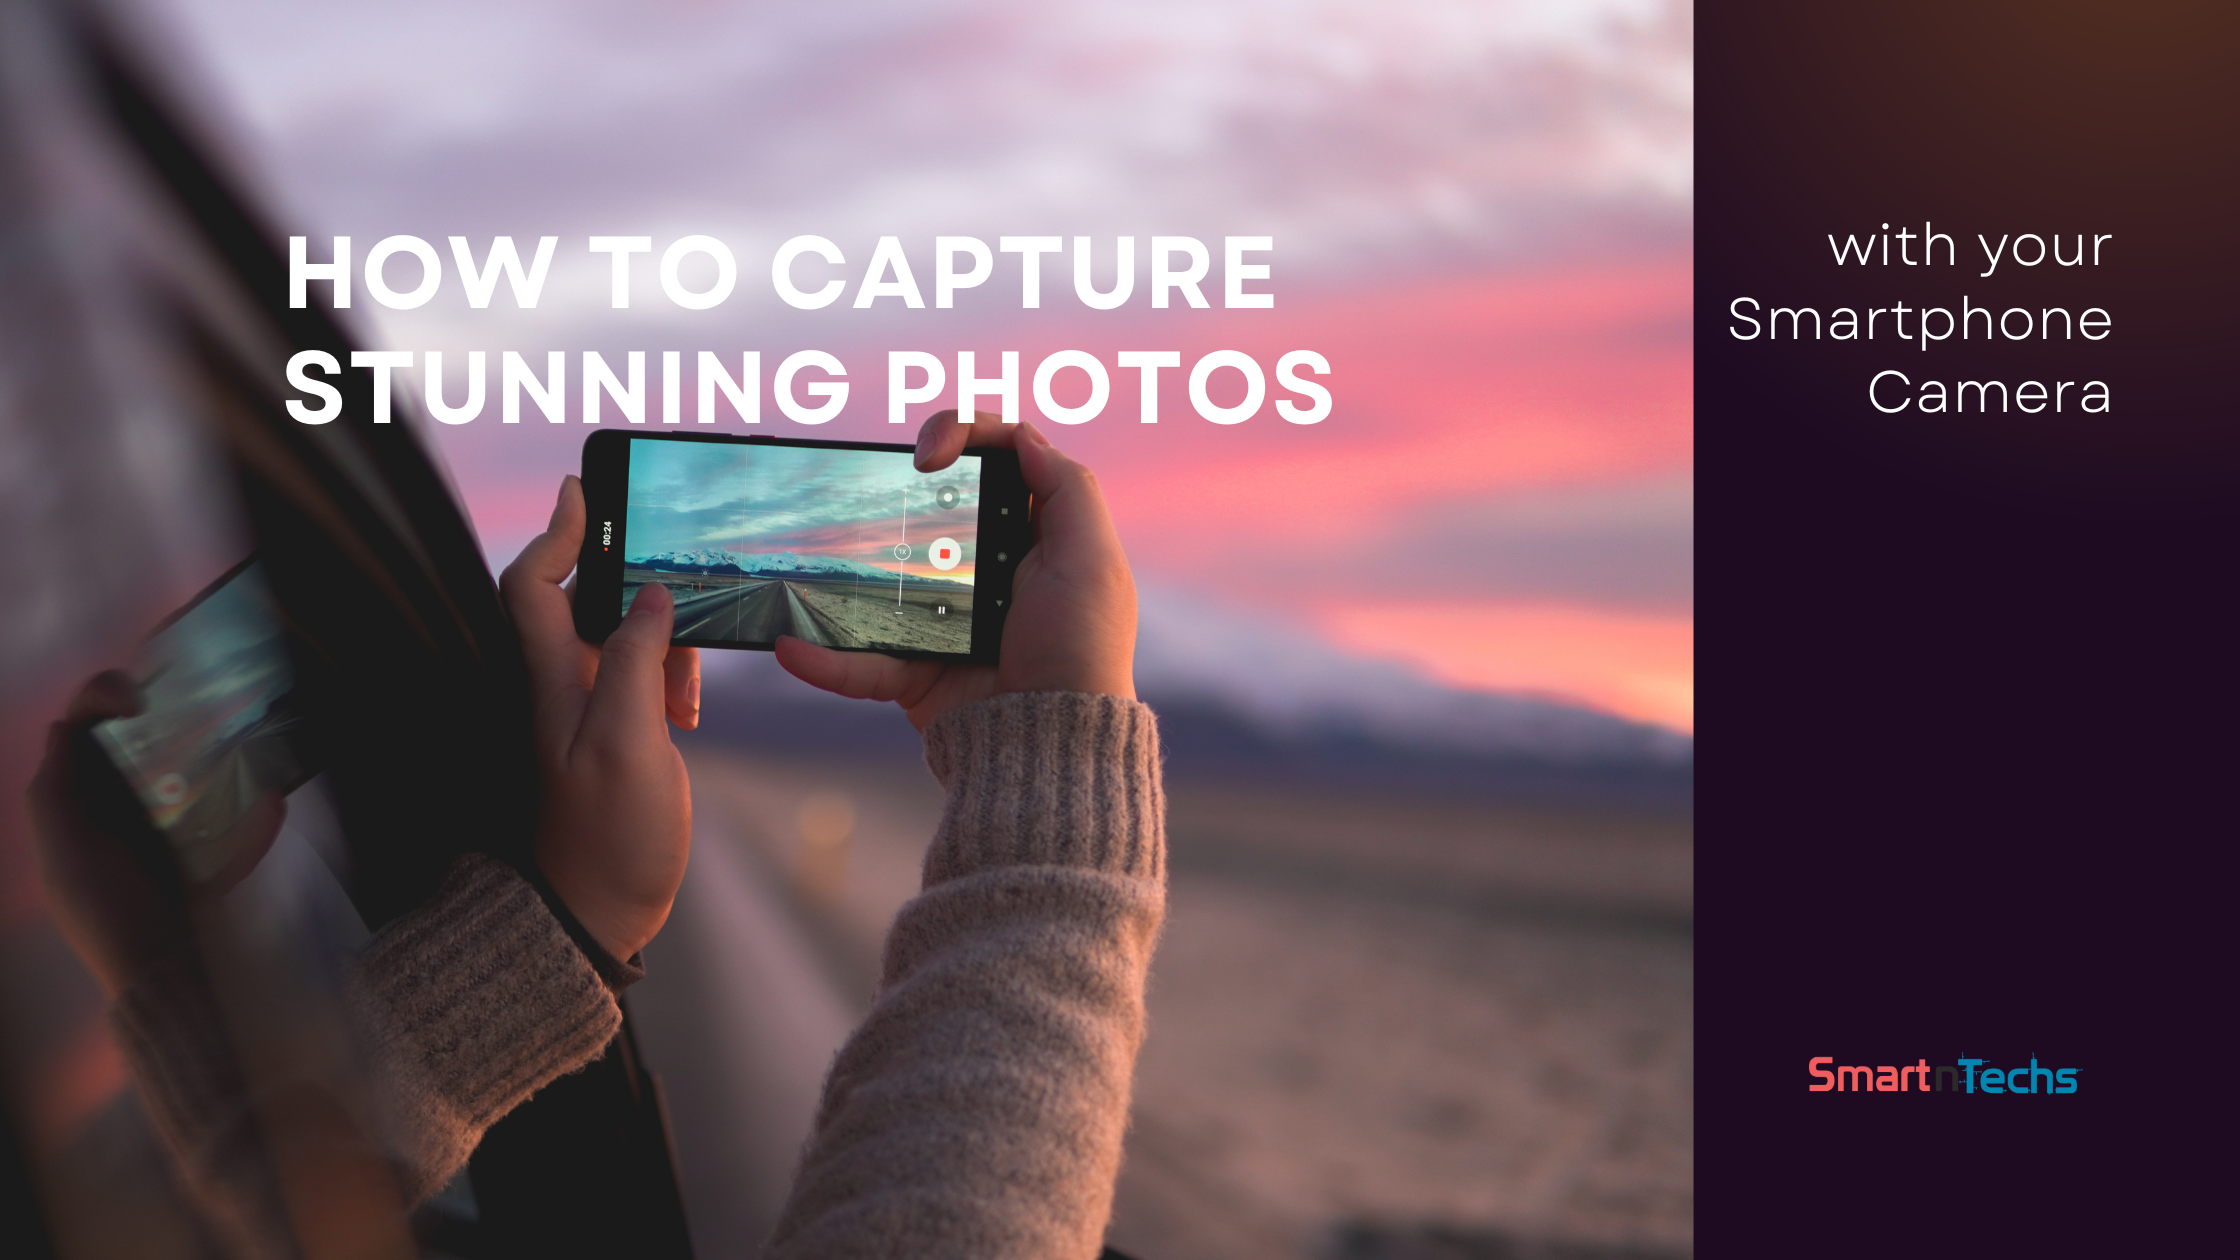 How to Capture Stunning Photos with your Smartphone Camera